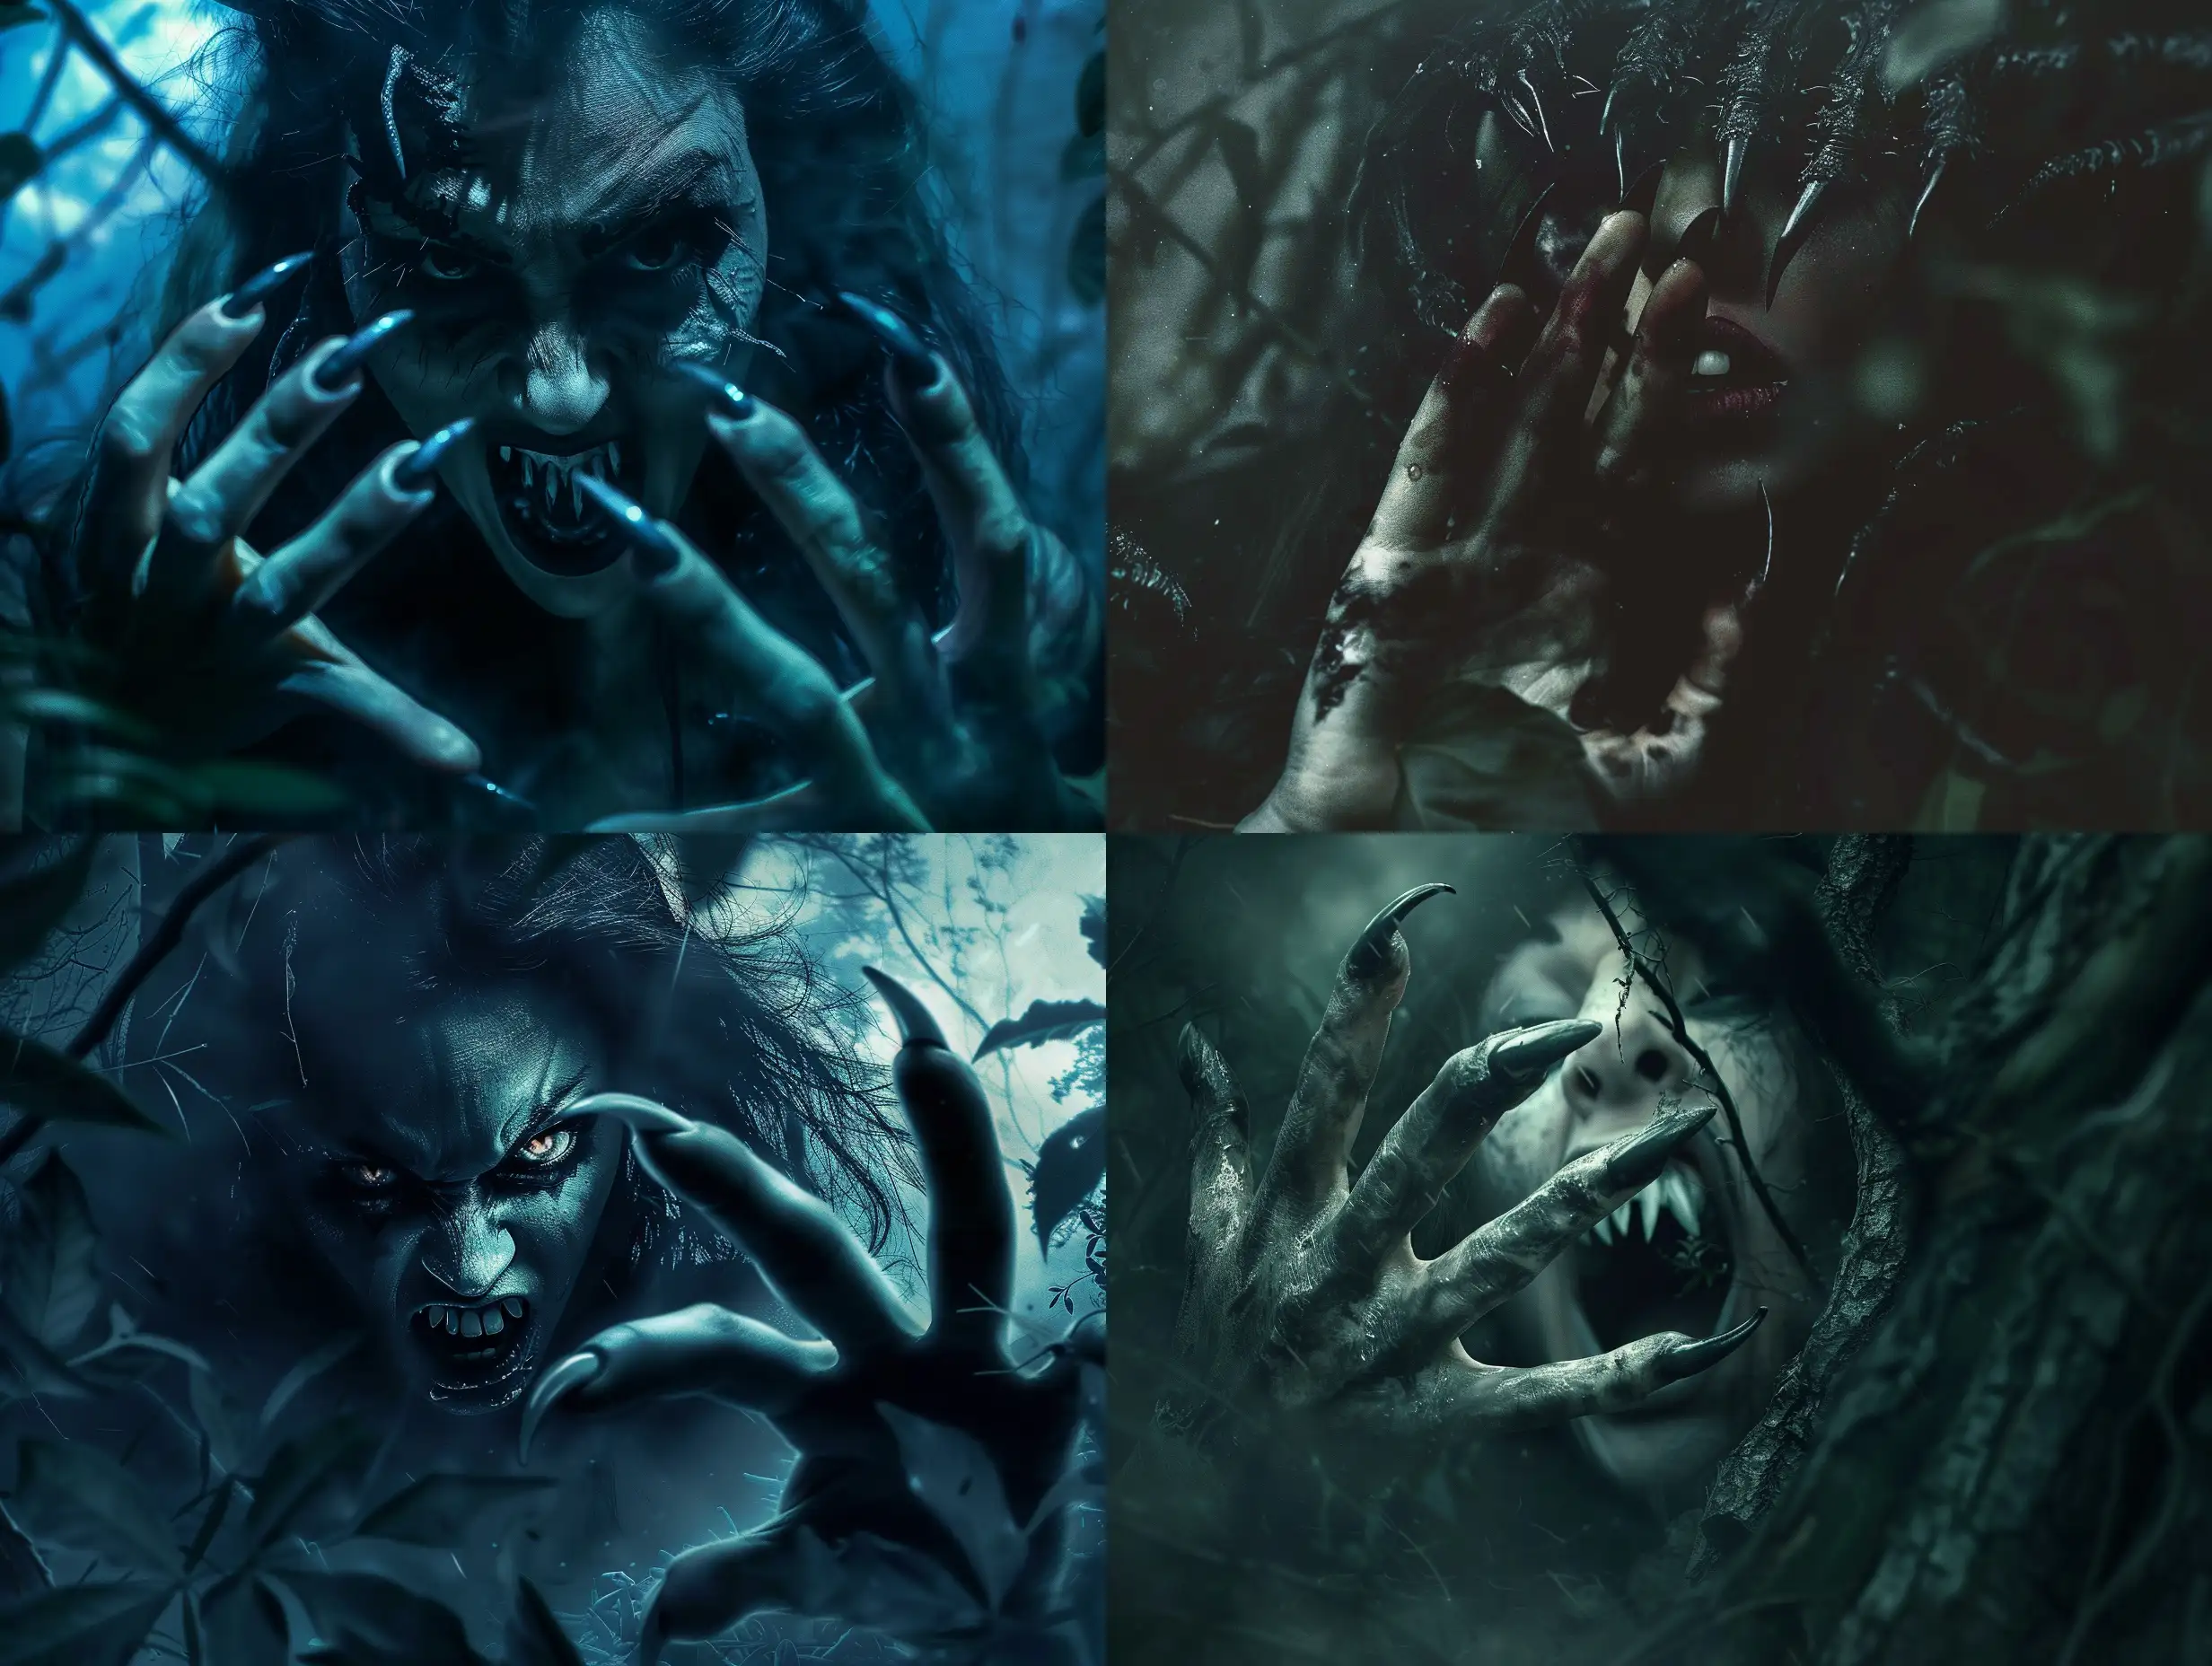 A photorealistic scene of a wild, ominous vampire woman emerging from the depths of a moonlit forest, her long, pointed fingernails resembling the claws of a nocturnal predator. With her mouth menacingly agape, her fang-like teeth exude an aura of primal terror. The vampire's appearance is reminiscent of one who has risen from the grave, evoking an otherworldly and haunting presence. The scene unfolds within the encompassing darkness of an ancient, gothic chamber, characterized by hyper-realism and cinematic quality.